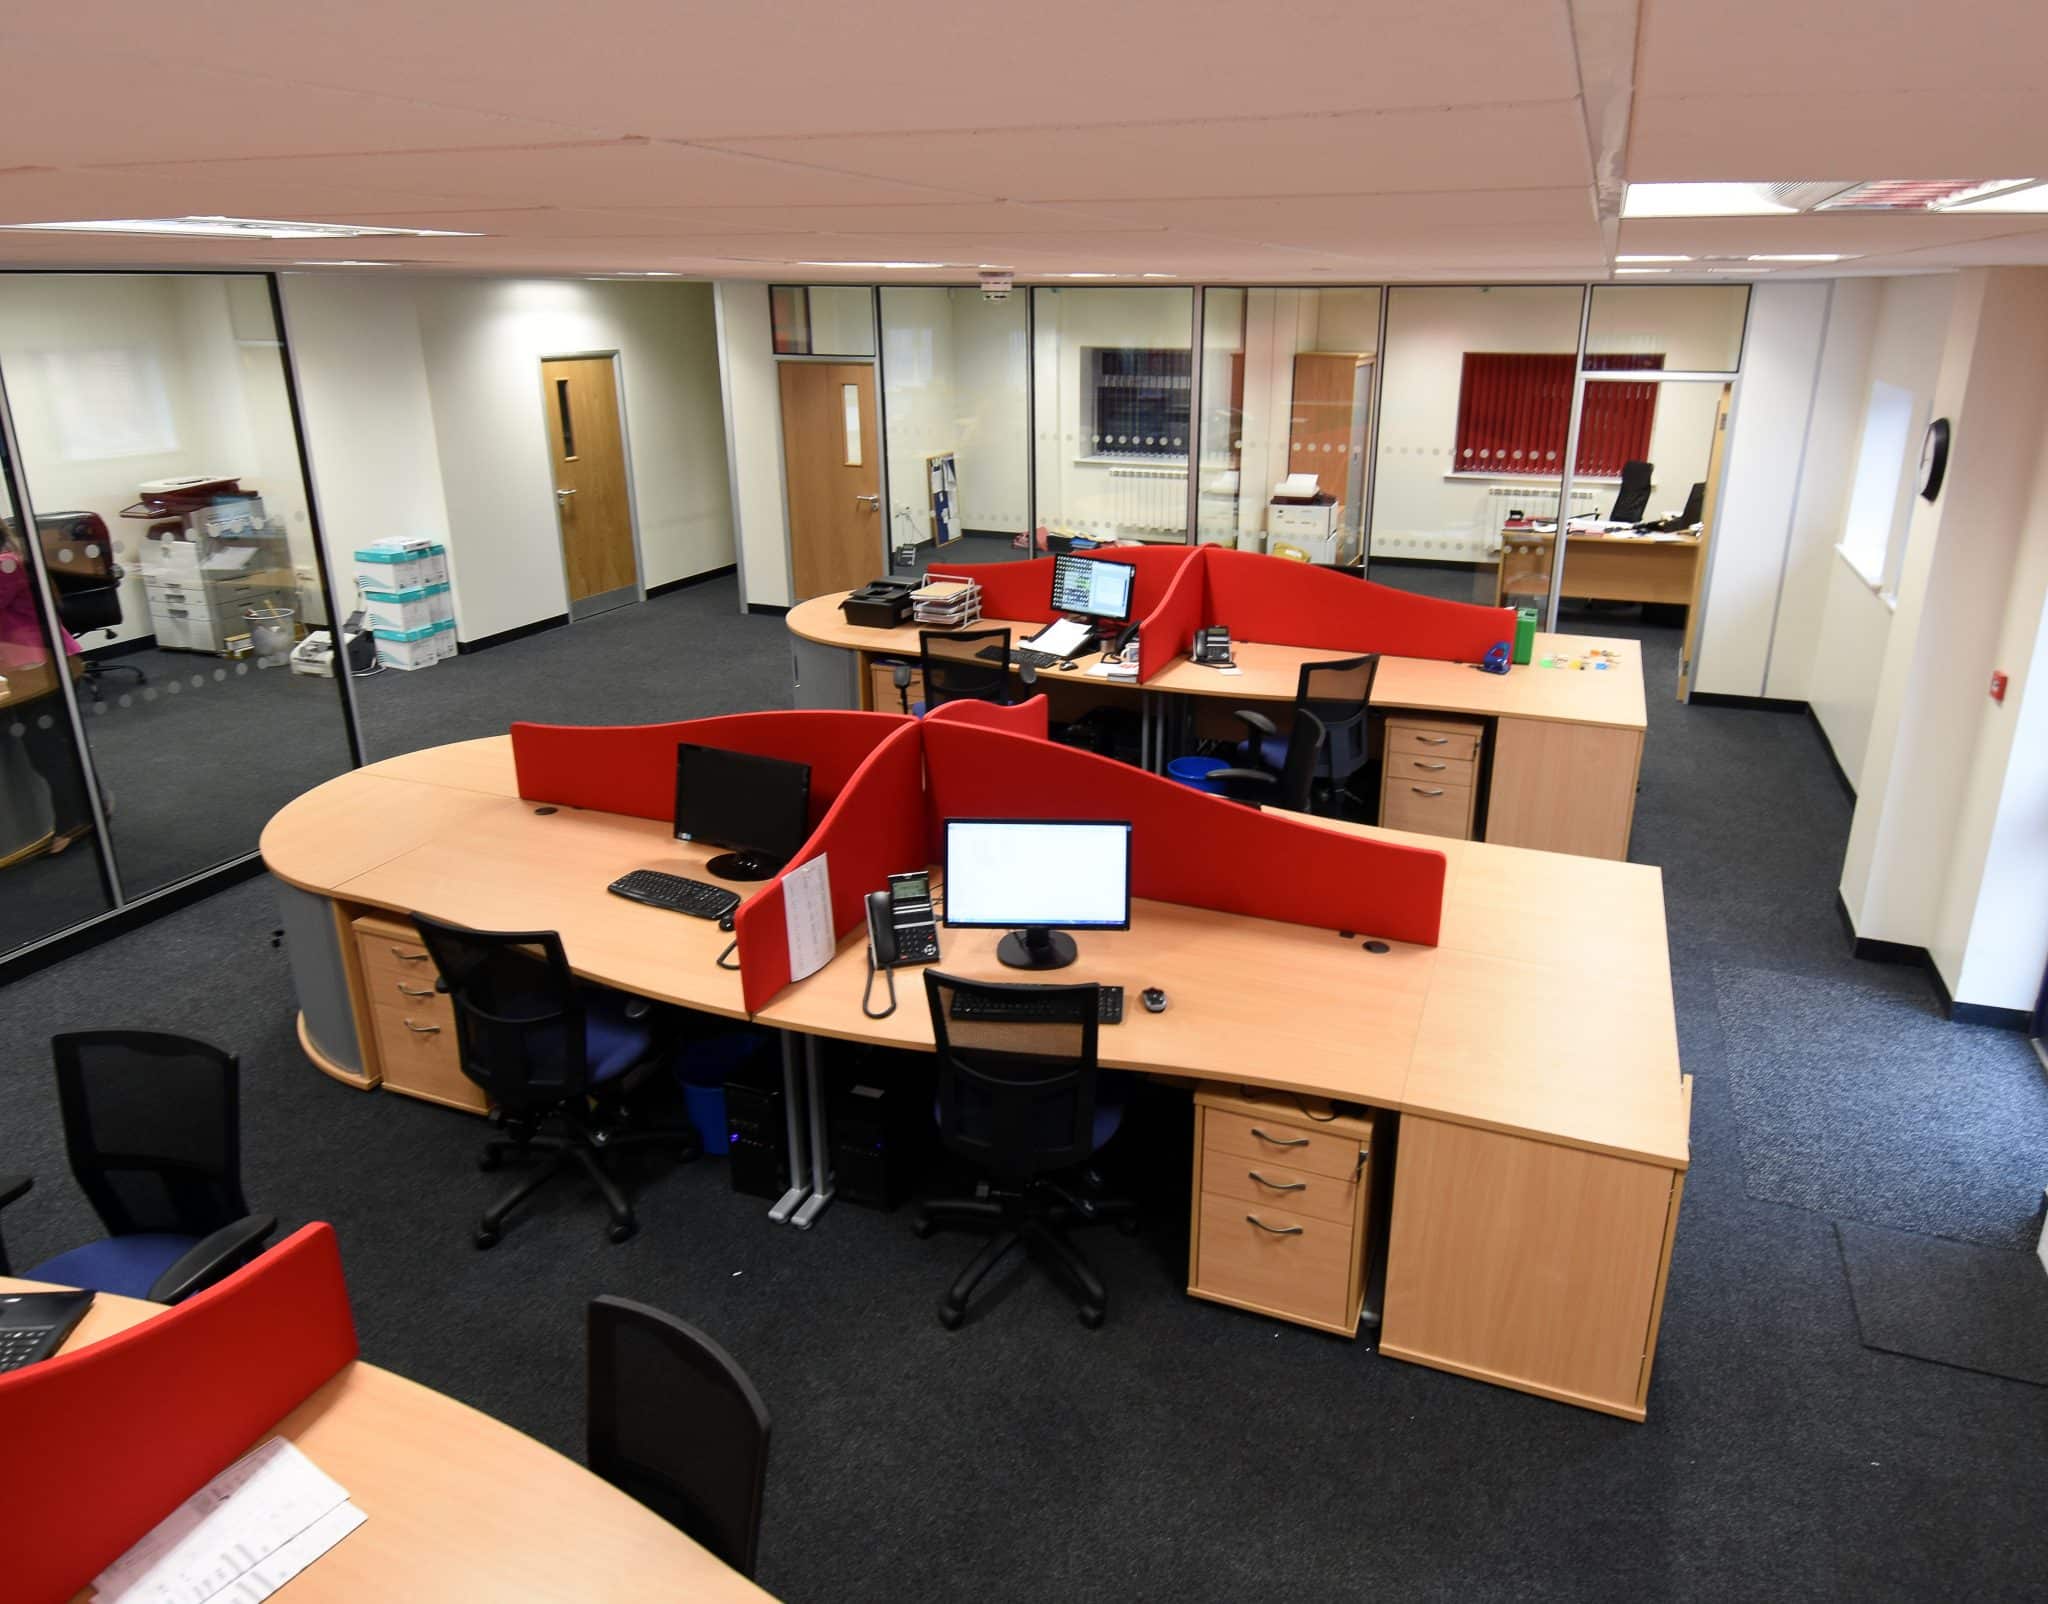 Office Area at Bryland Fire Protection